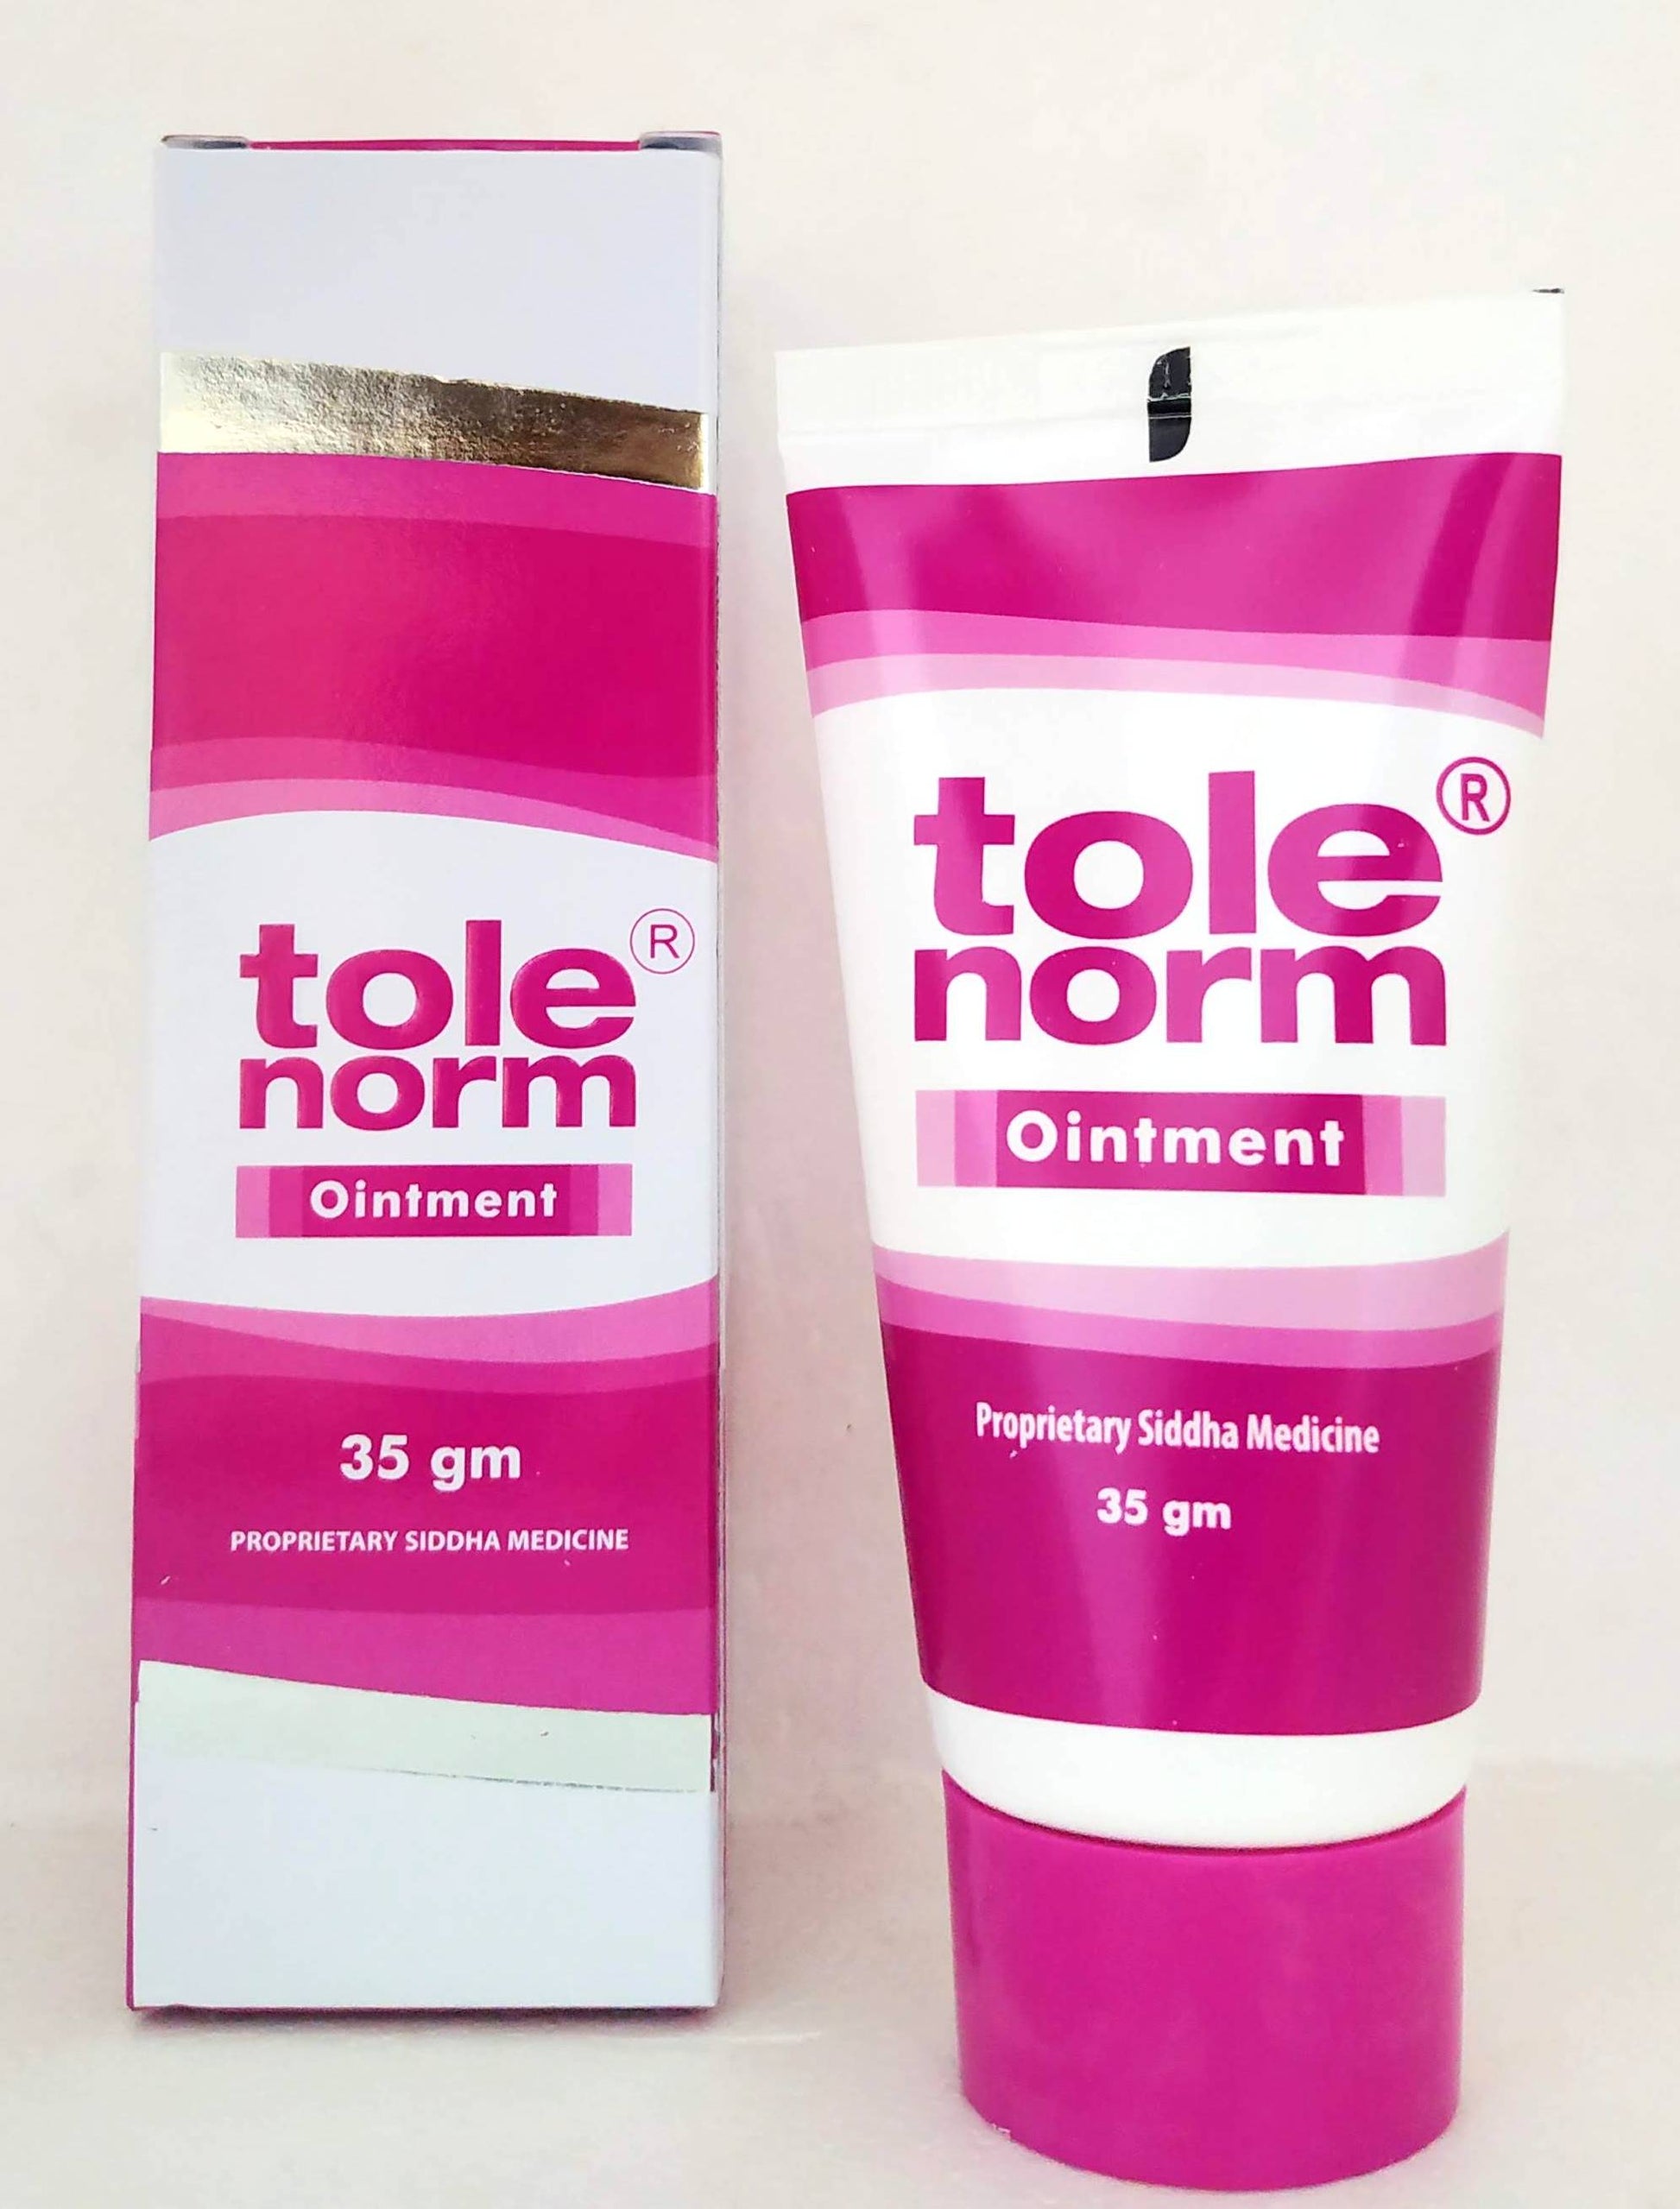 Shop Tolenorm Ointment 35gm at price 200.00 from Dr.JRK Online - Ayush Care